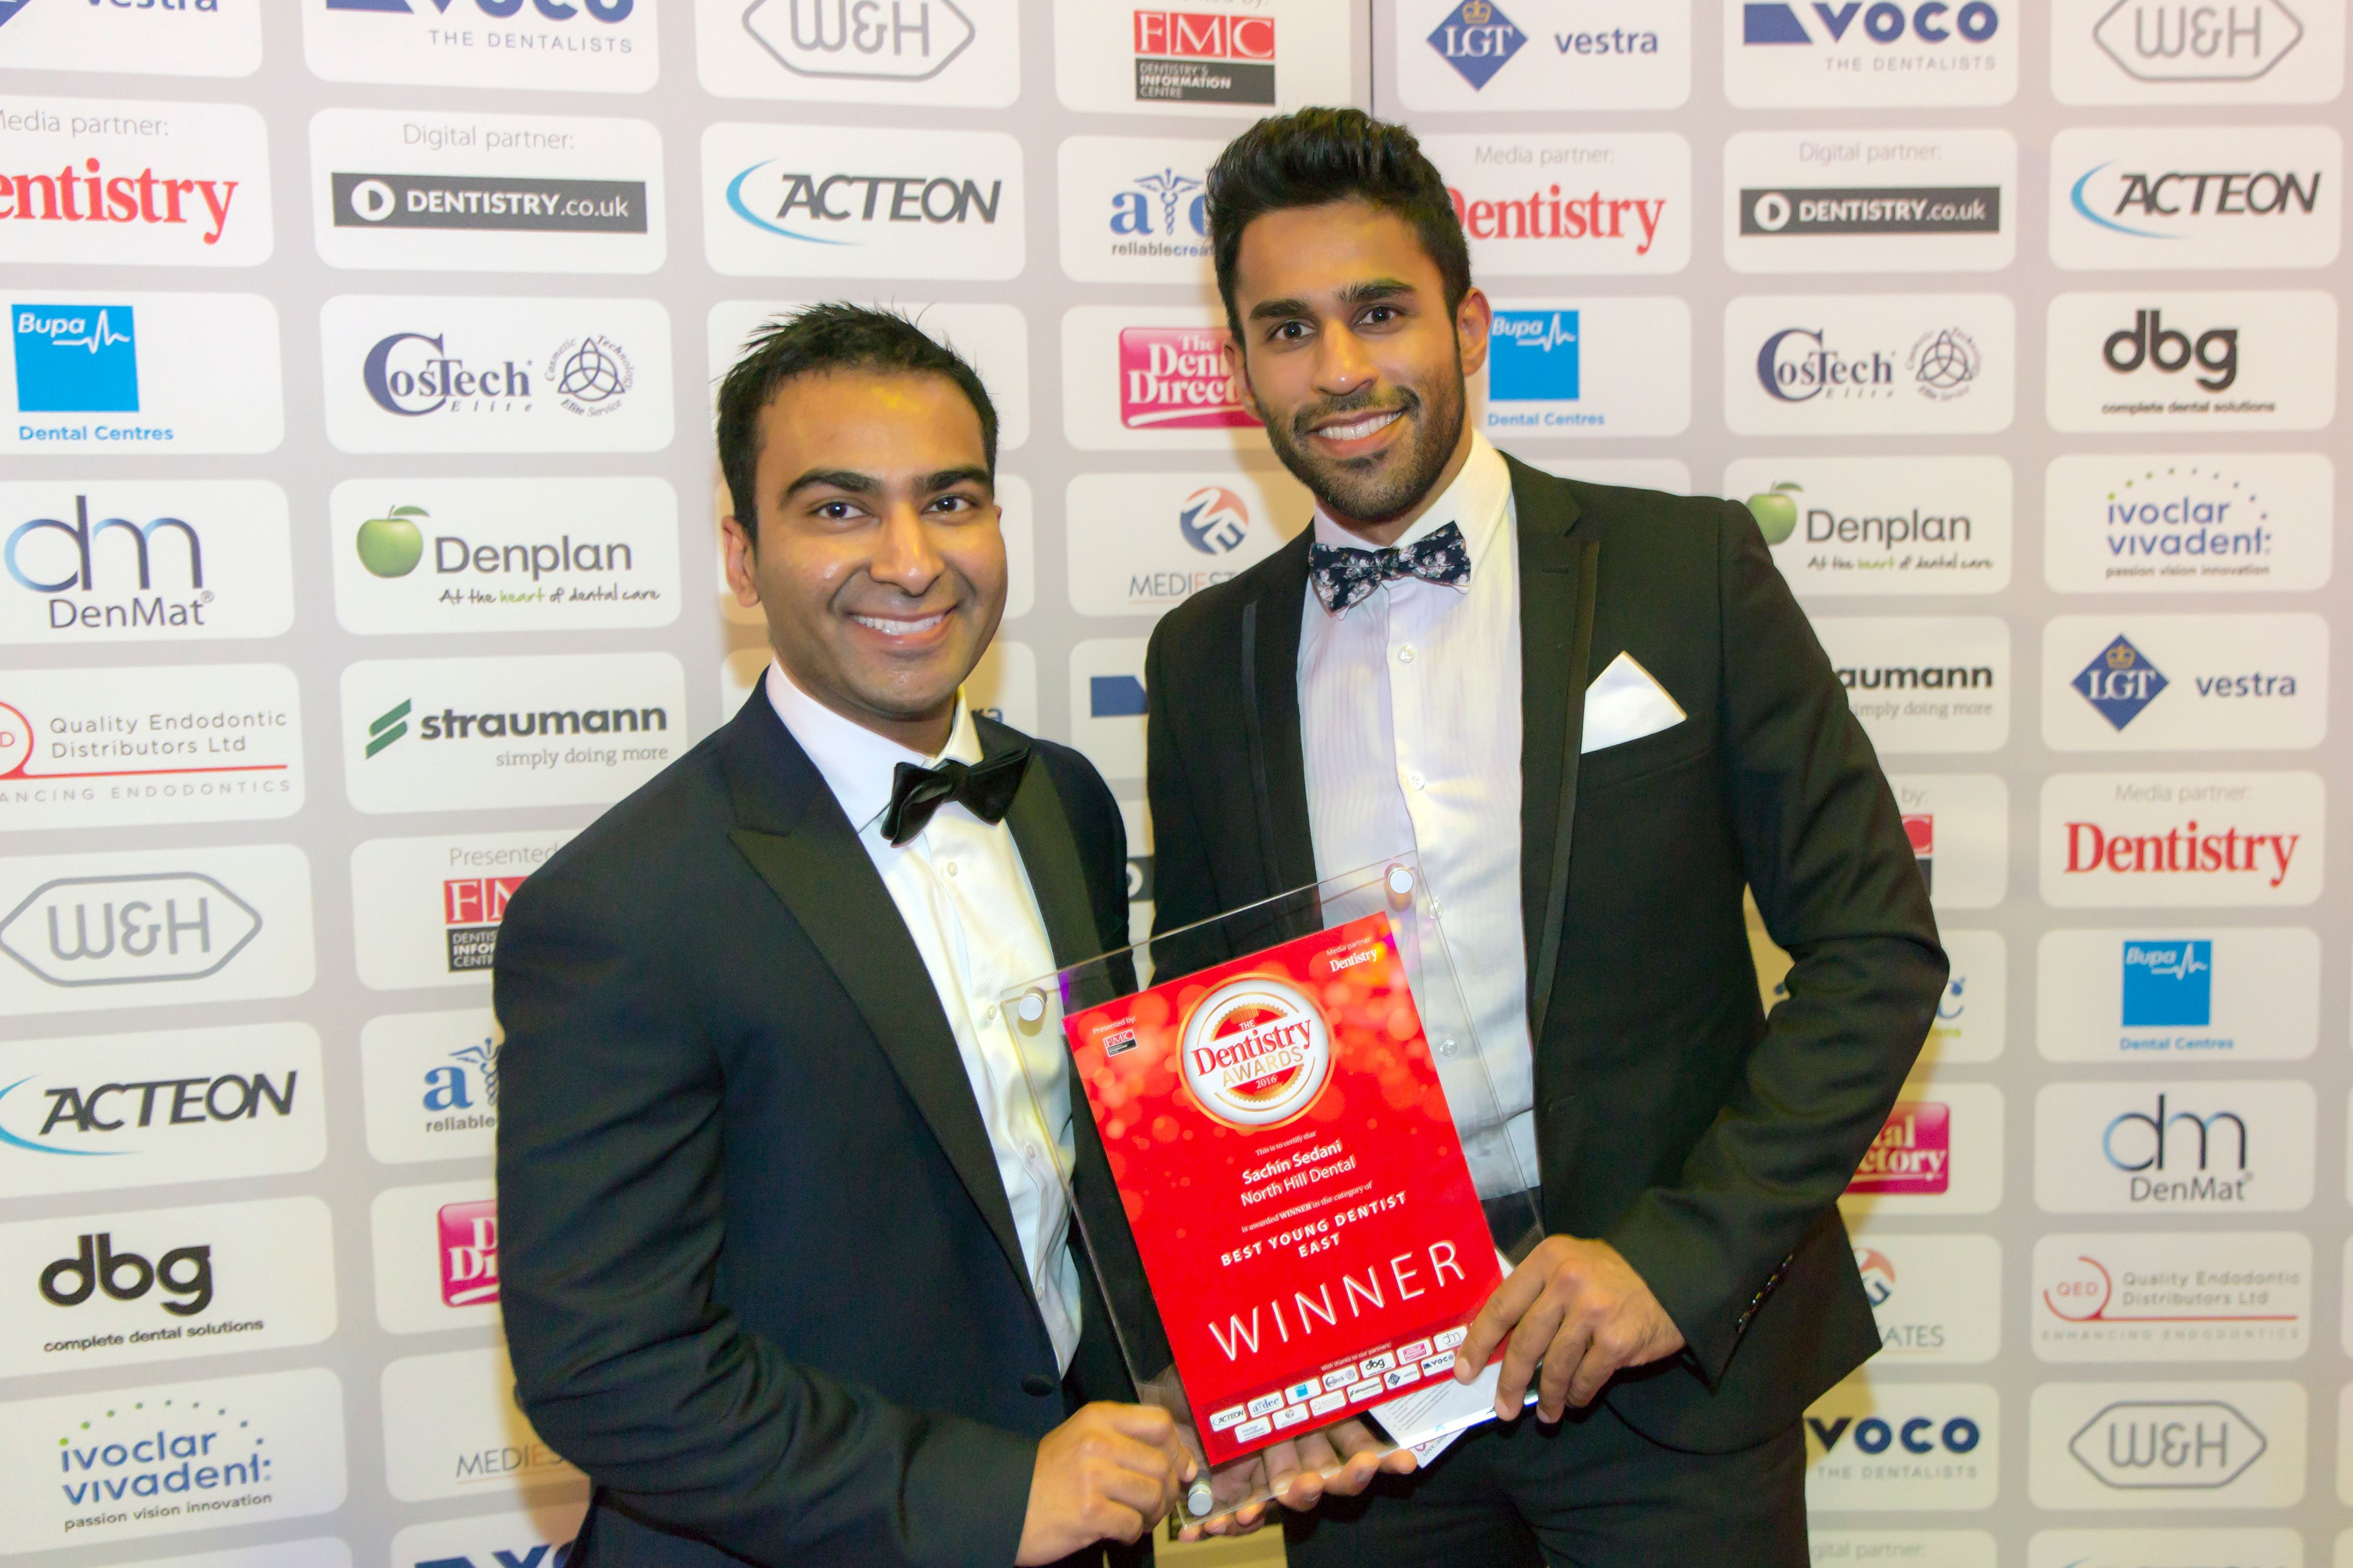 Colchester dental practice off to a winning start following awards success